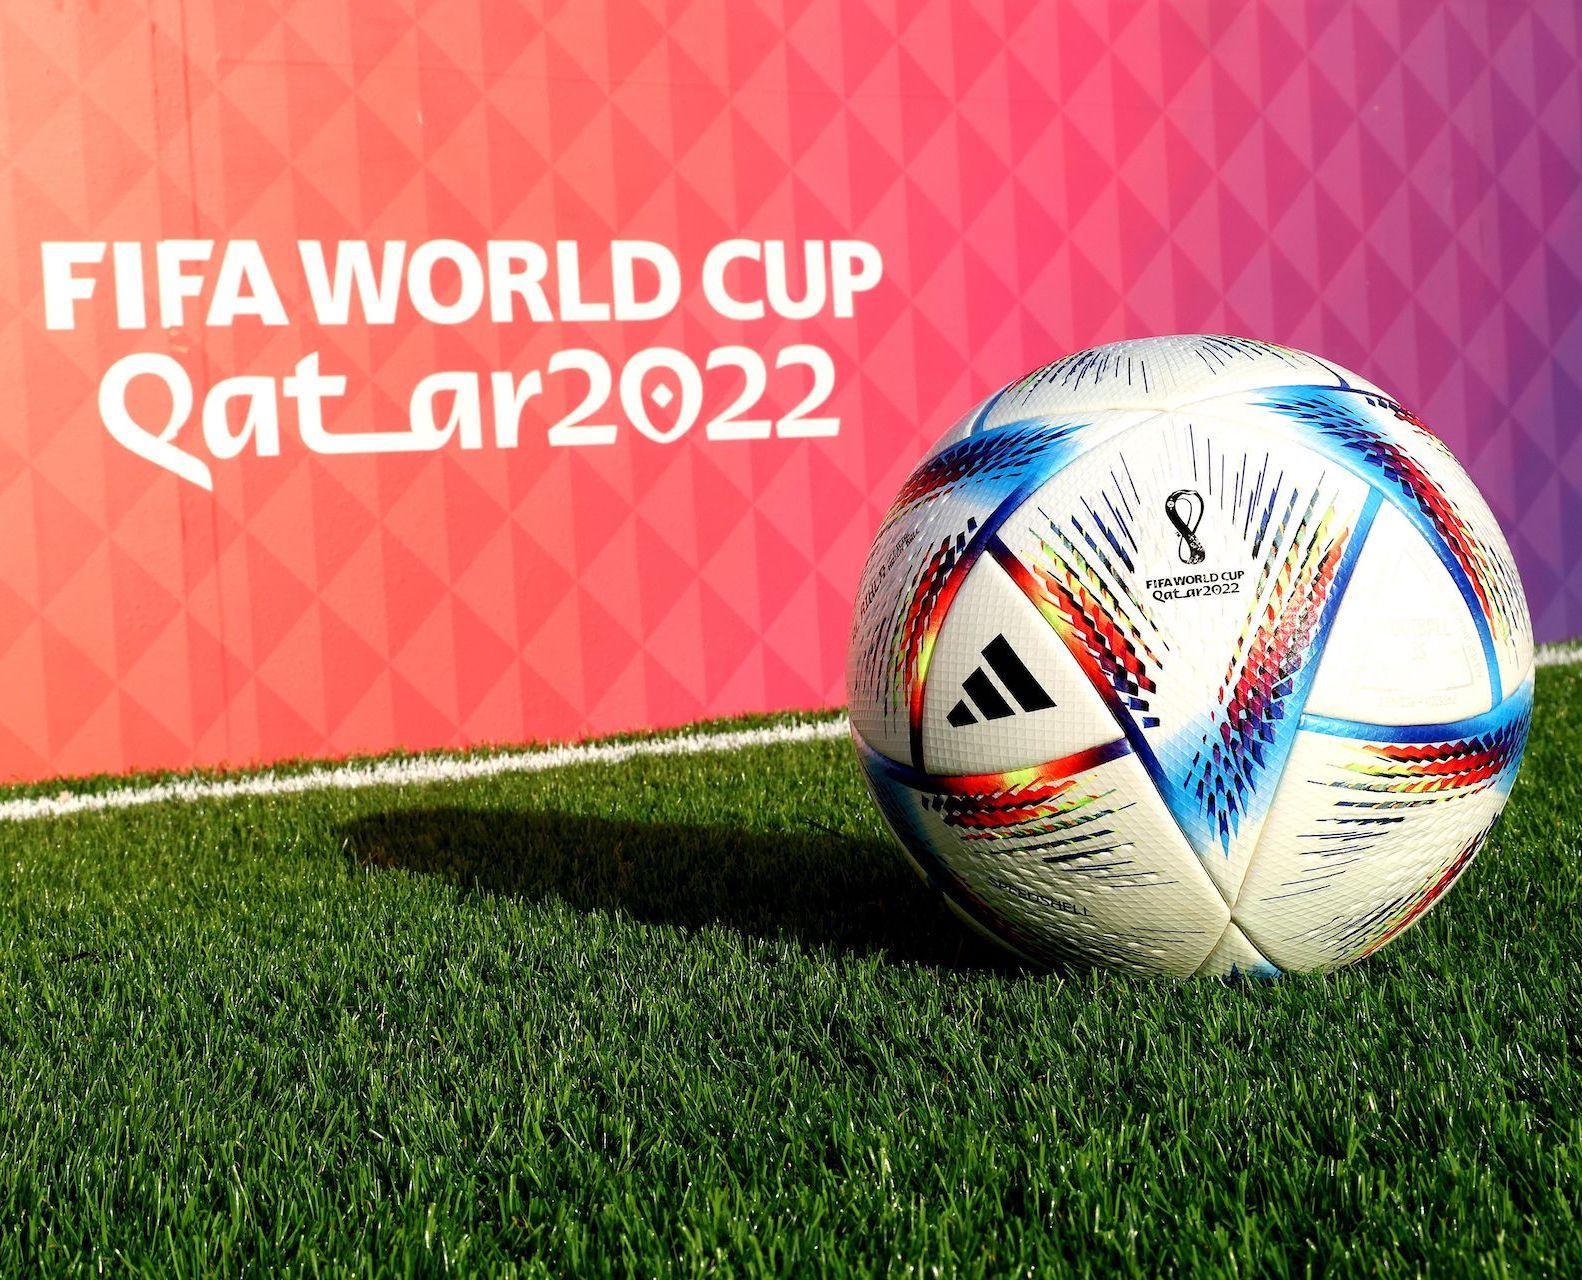 FIFA World Cup Qatar 2022 draw All the details and draw results